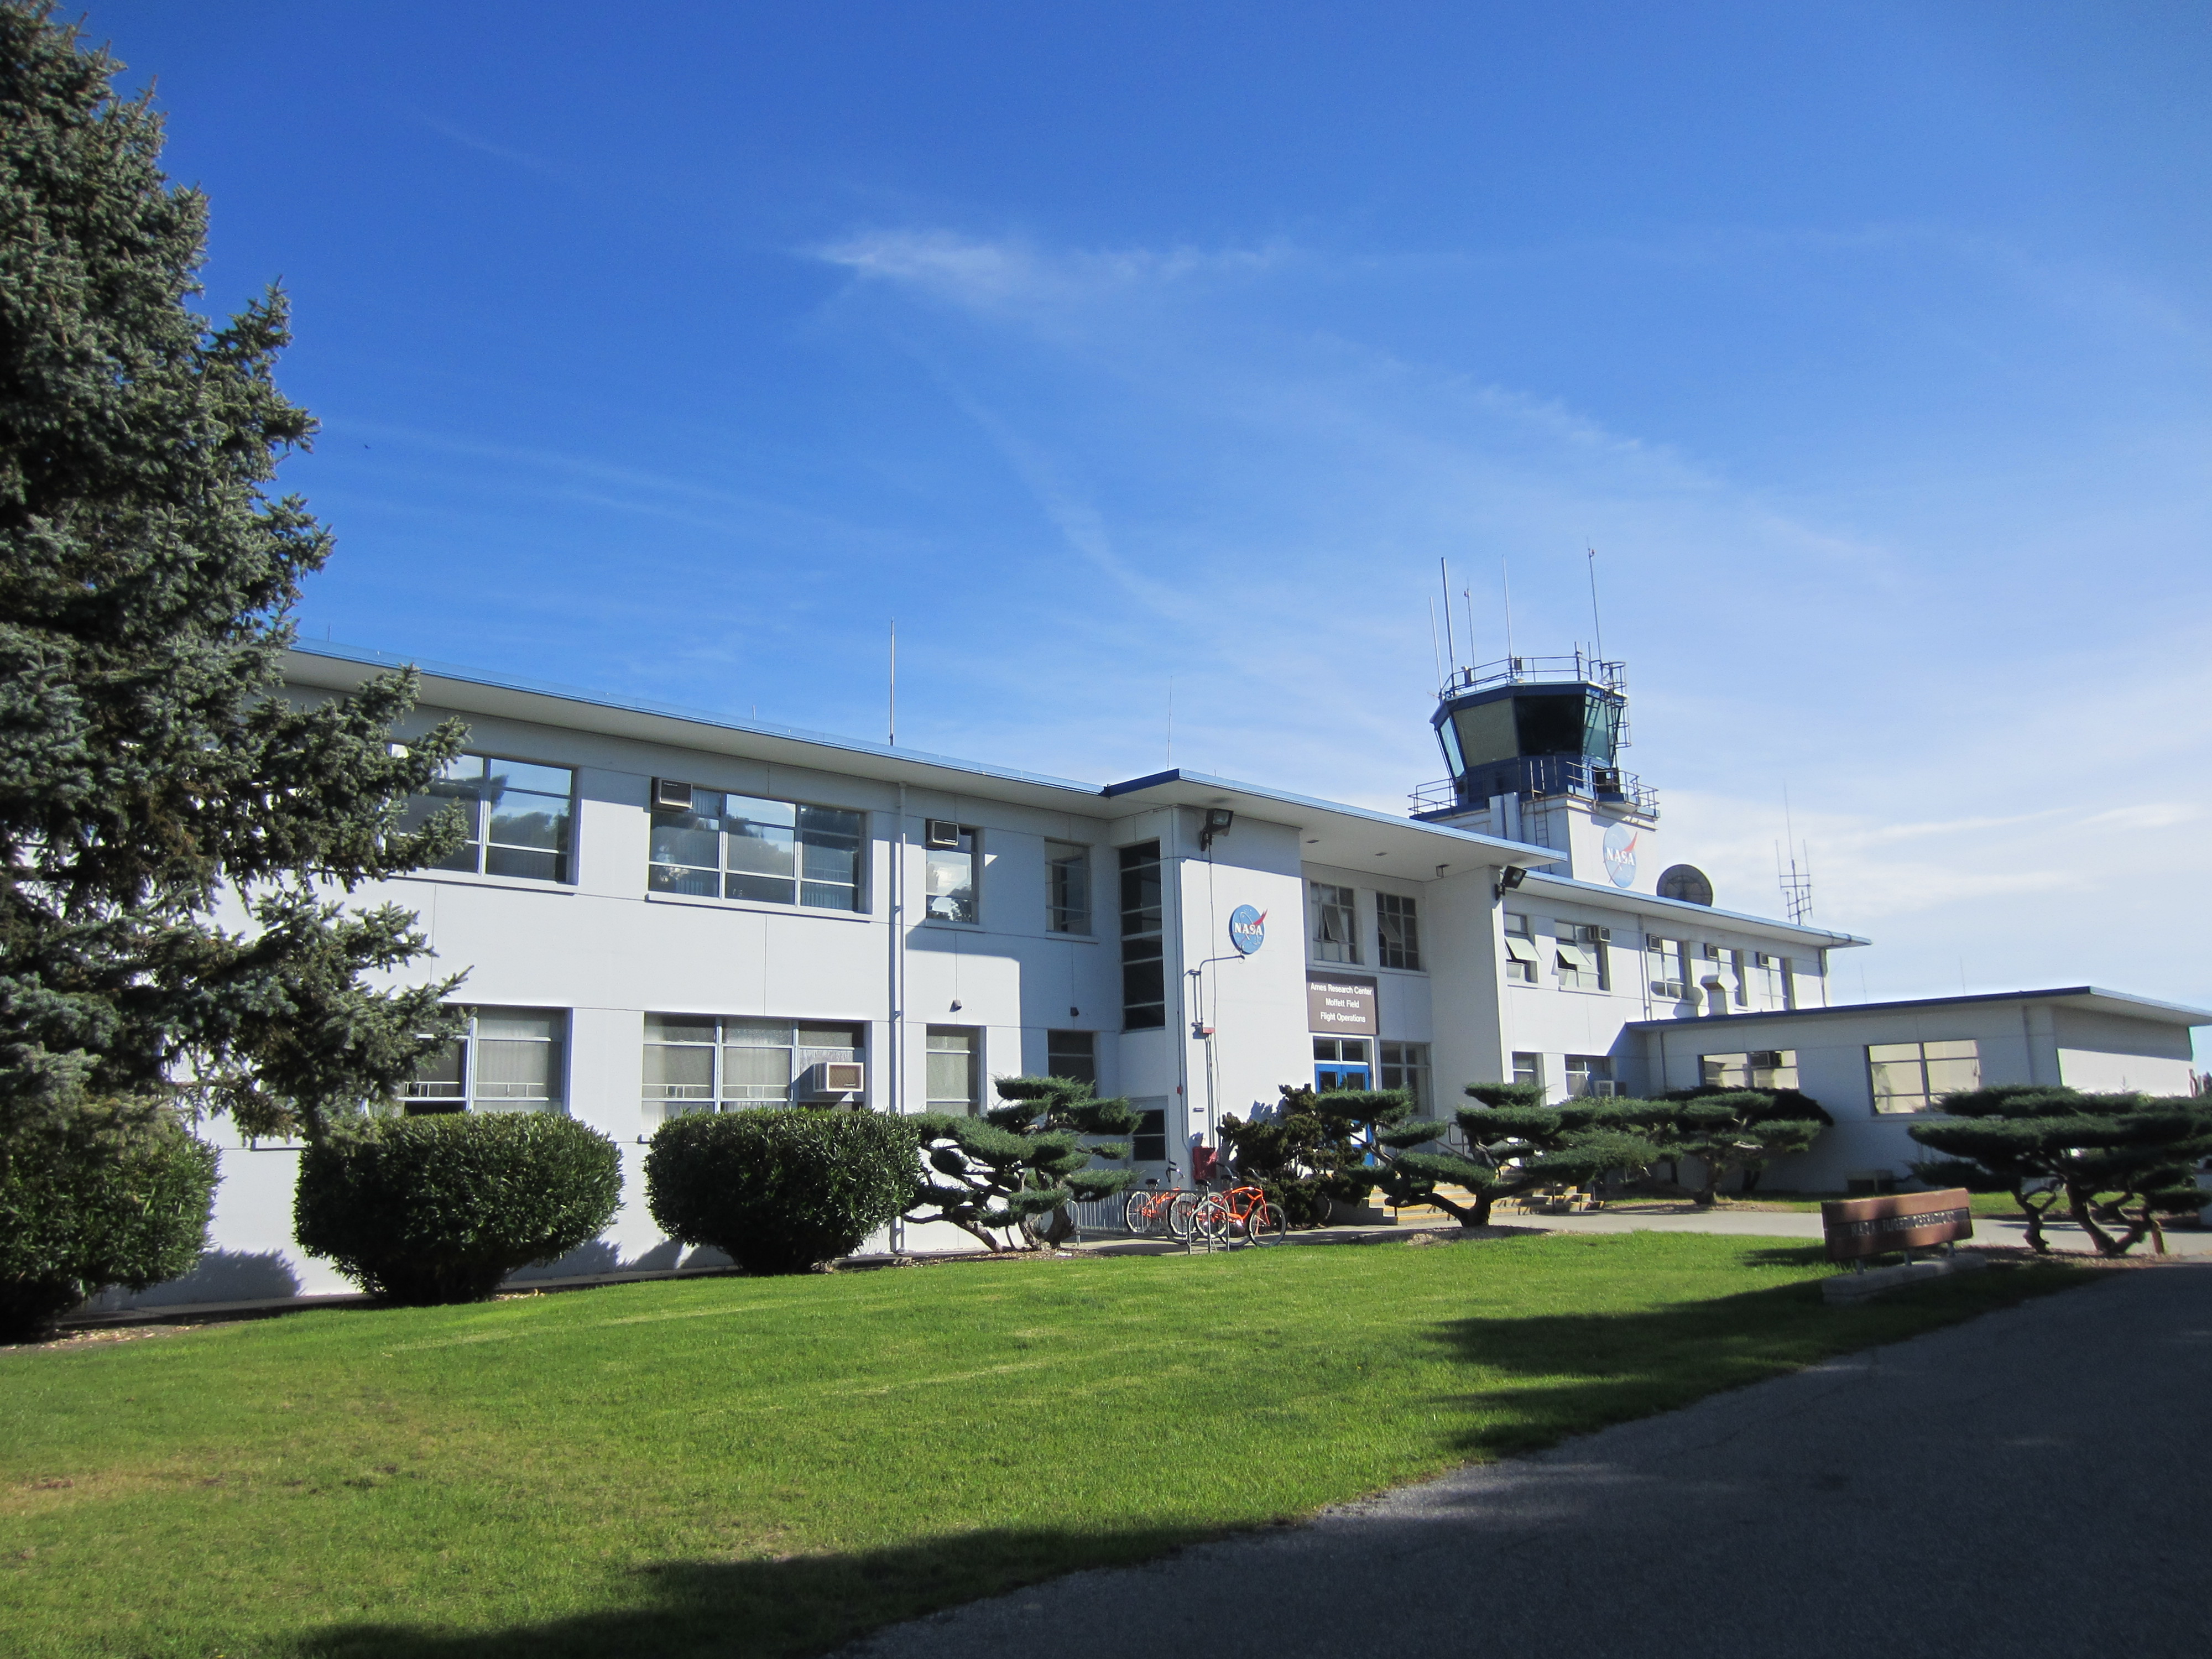 Moffett Federal Airfield aircraft control tower behind the operations building